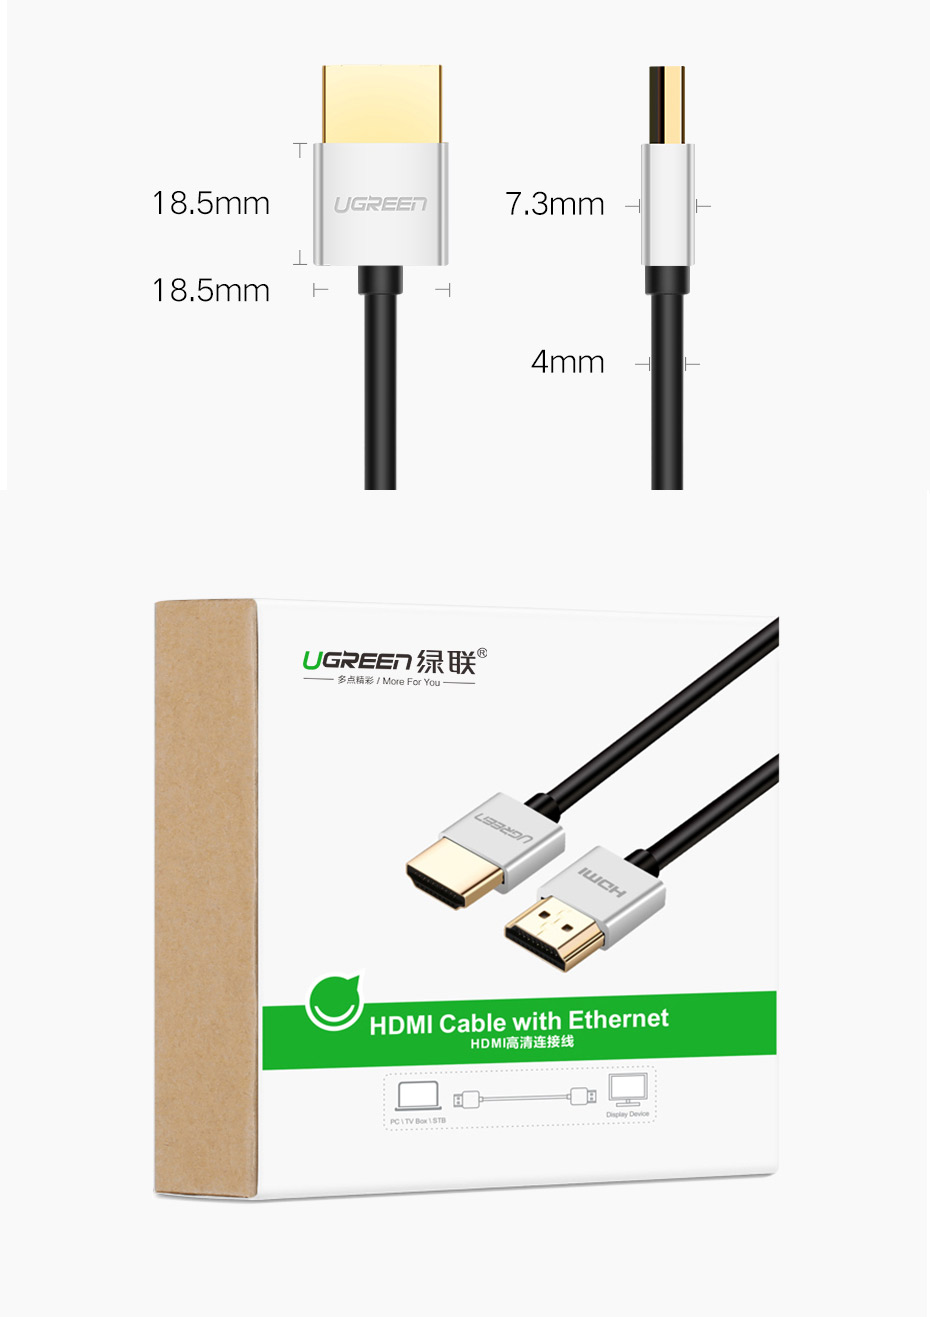 Ugreen-4K-HDMI-Cable-Slim-HDMI-to-HDMI-20-Cable-60Hz-Audio-Video-Cable-for-PS4-Apple-TV-Splitter-Swi-1625988